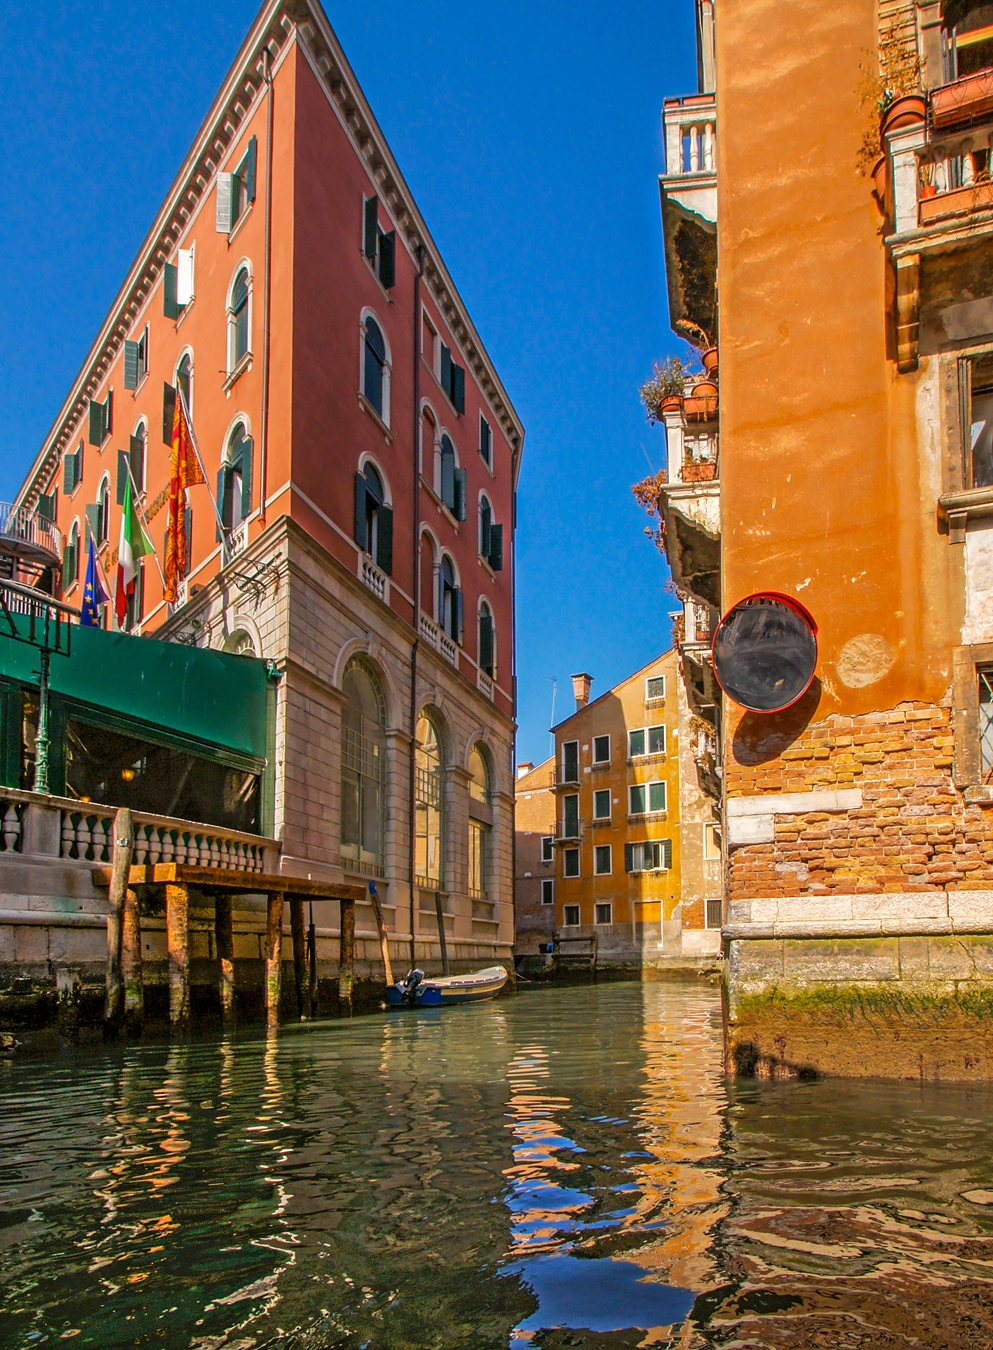 World tour around the world - the water city of Venice